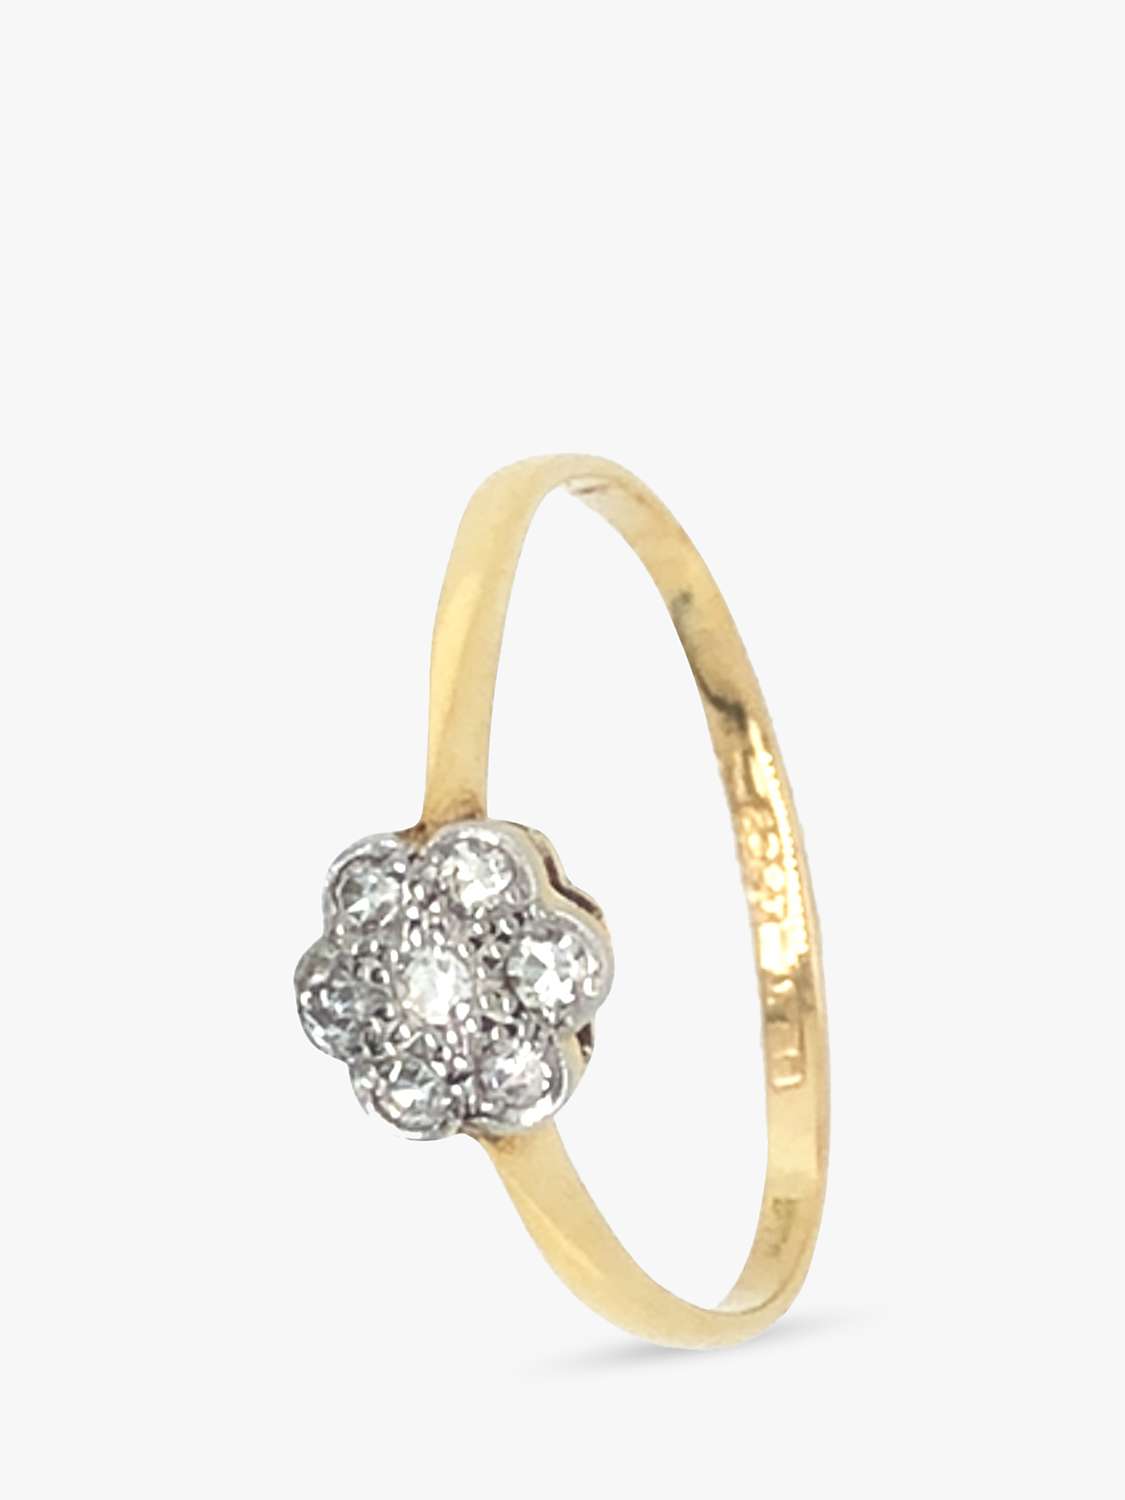 Buy VF Jewellery 18ct Yellow & White Gold 7 Stone Cluster Diamond Second Hand Ring Online at johnlewis.com